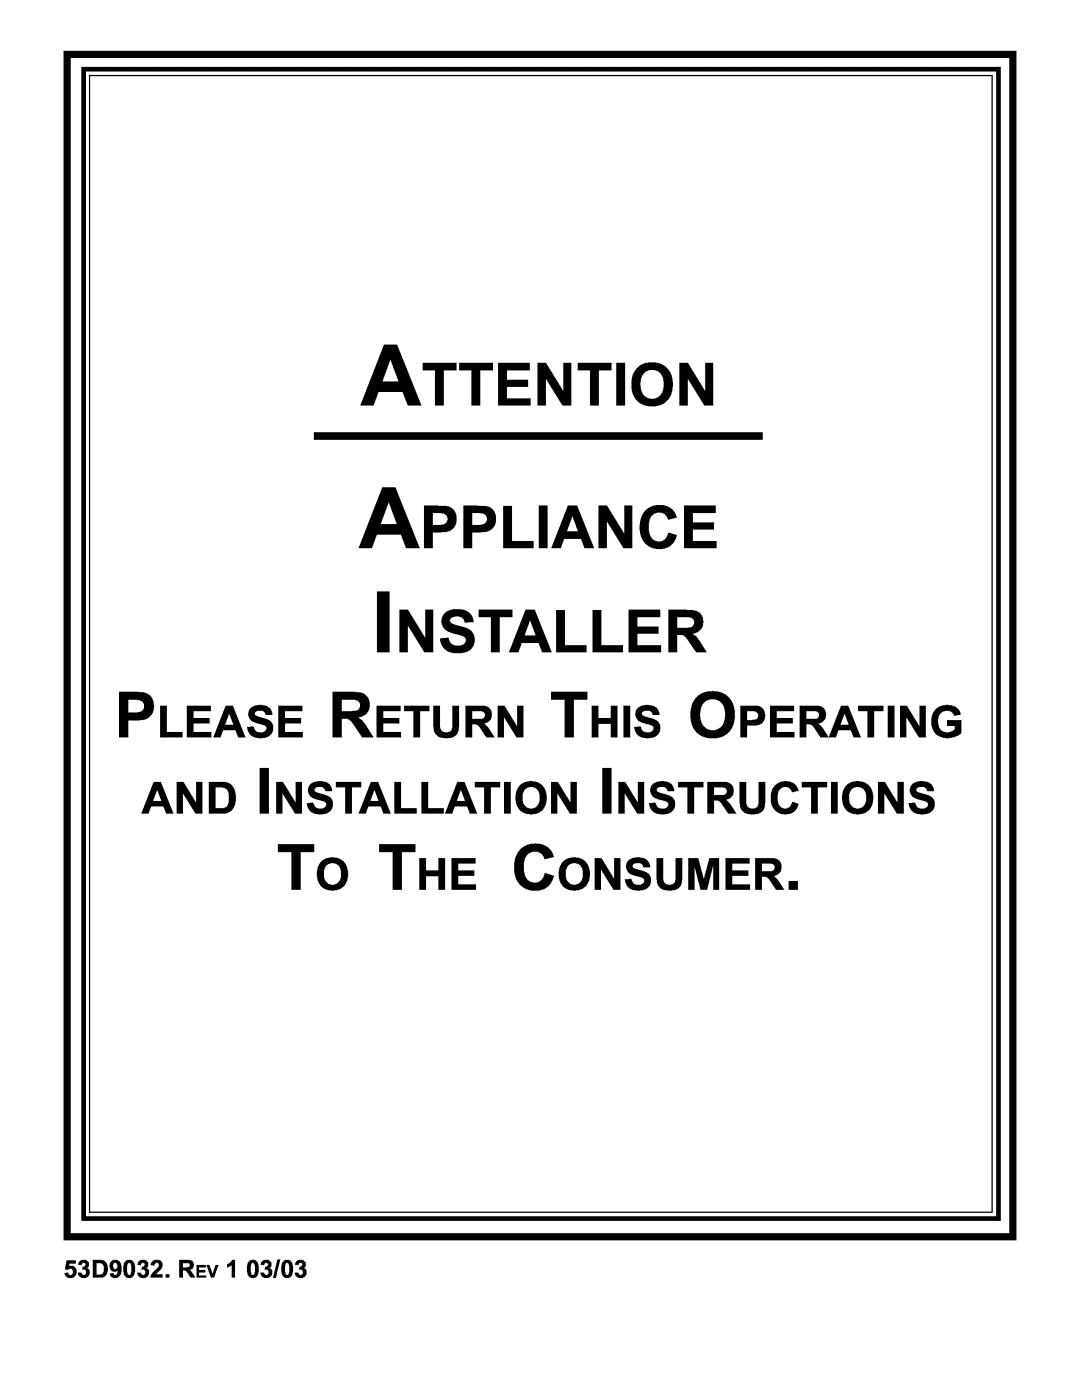 Monessen Hearth BWB400 Please Return This Operating And Installation Instructions, 53D9032. REV 1 03/03, To The Consumer 